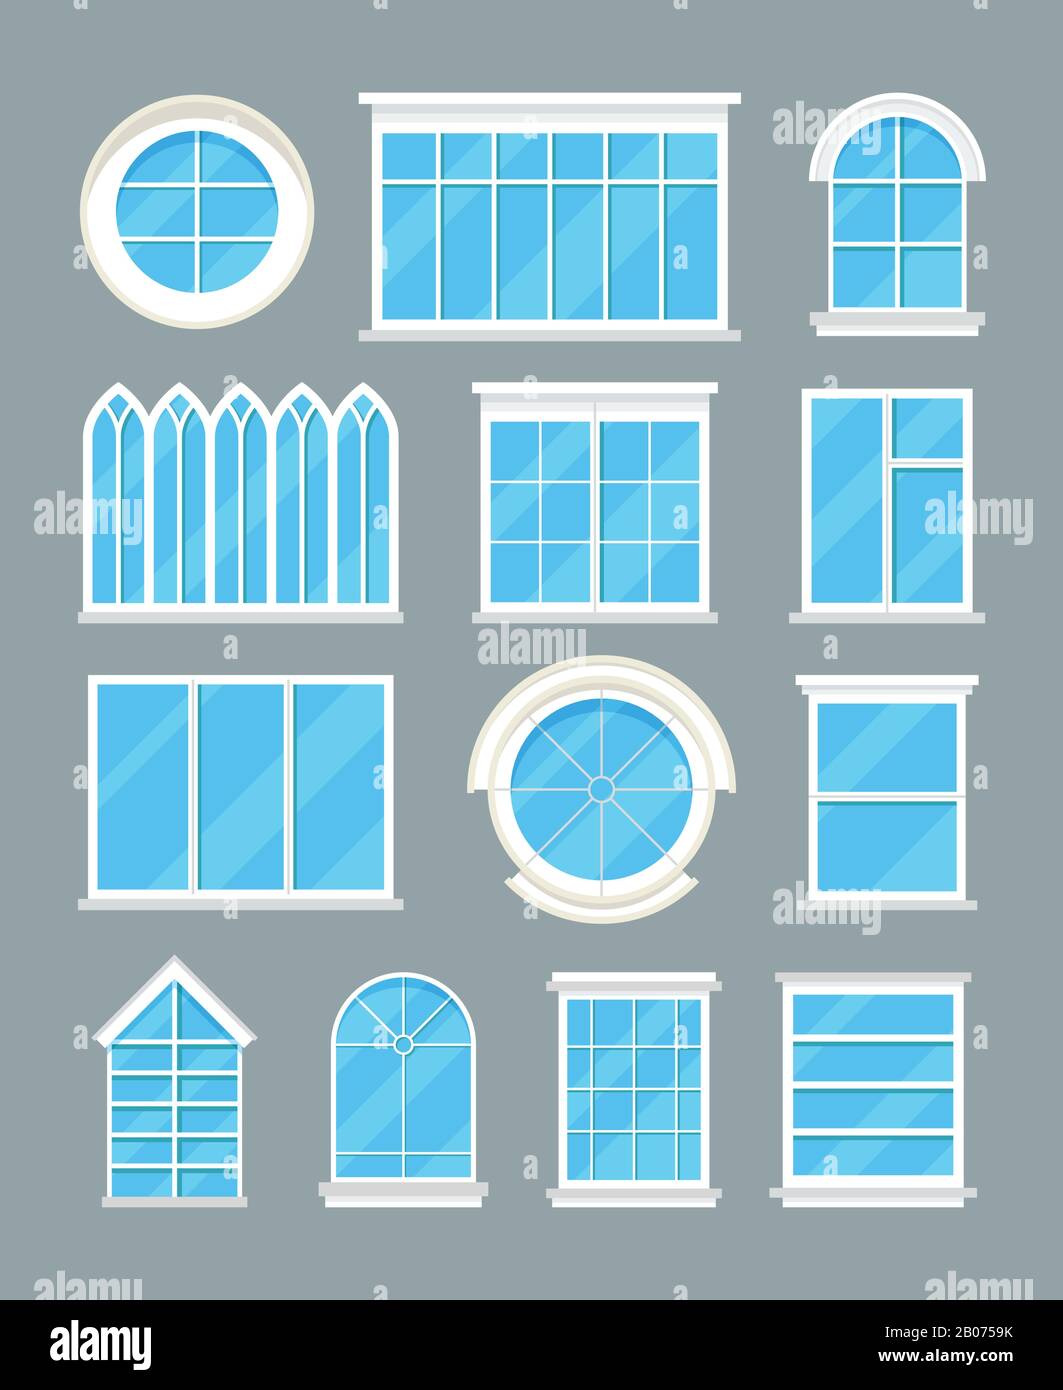 Glass home windows types vector flat icons. Set of window for interior design illustration Stock Vector